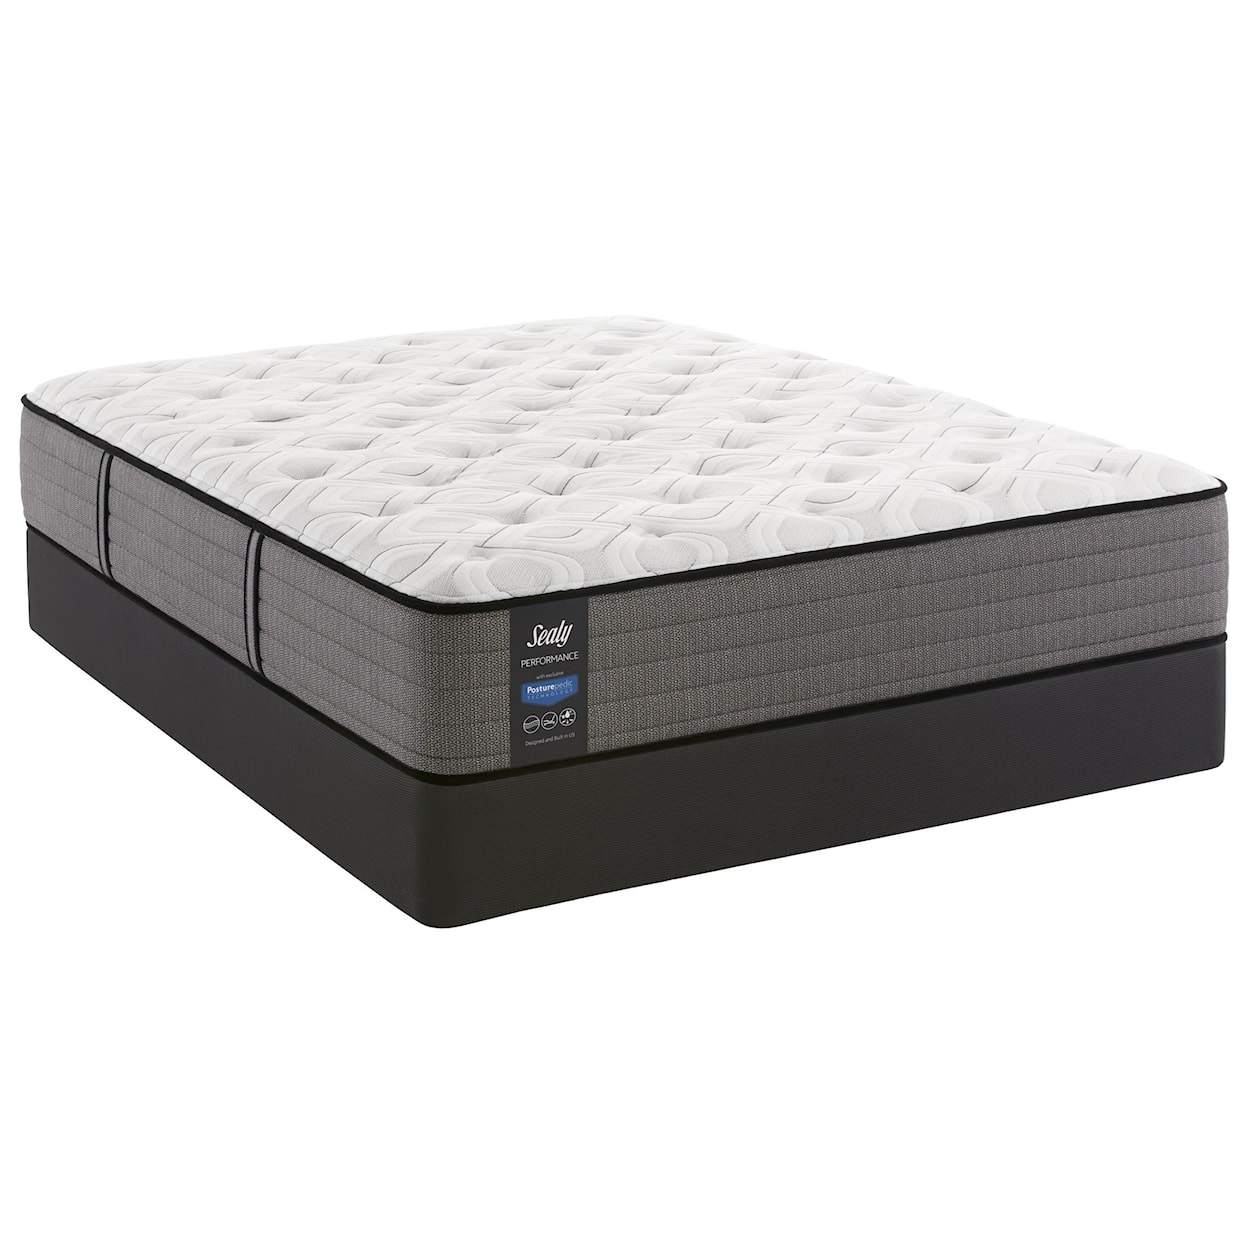 Sealy Serious Firm Full 11" Firm Encased Coil Mattress Set